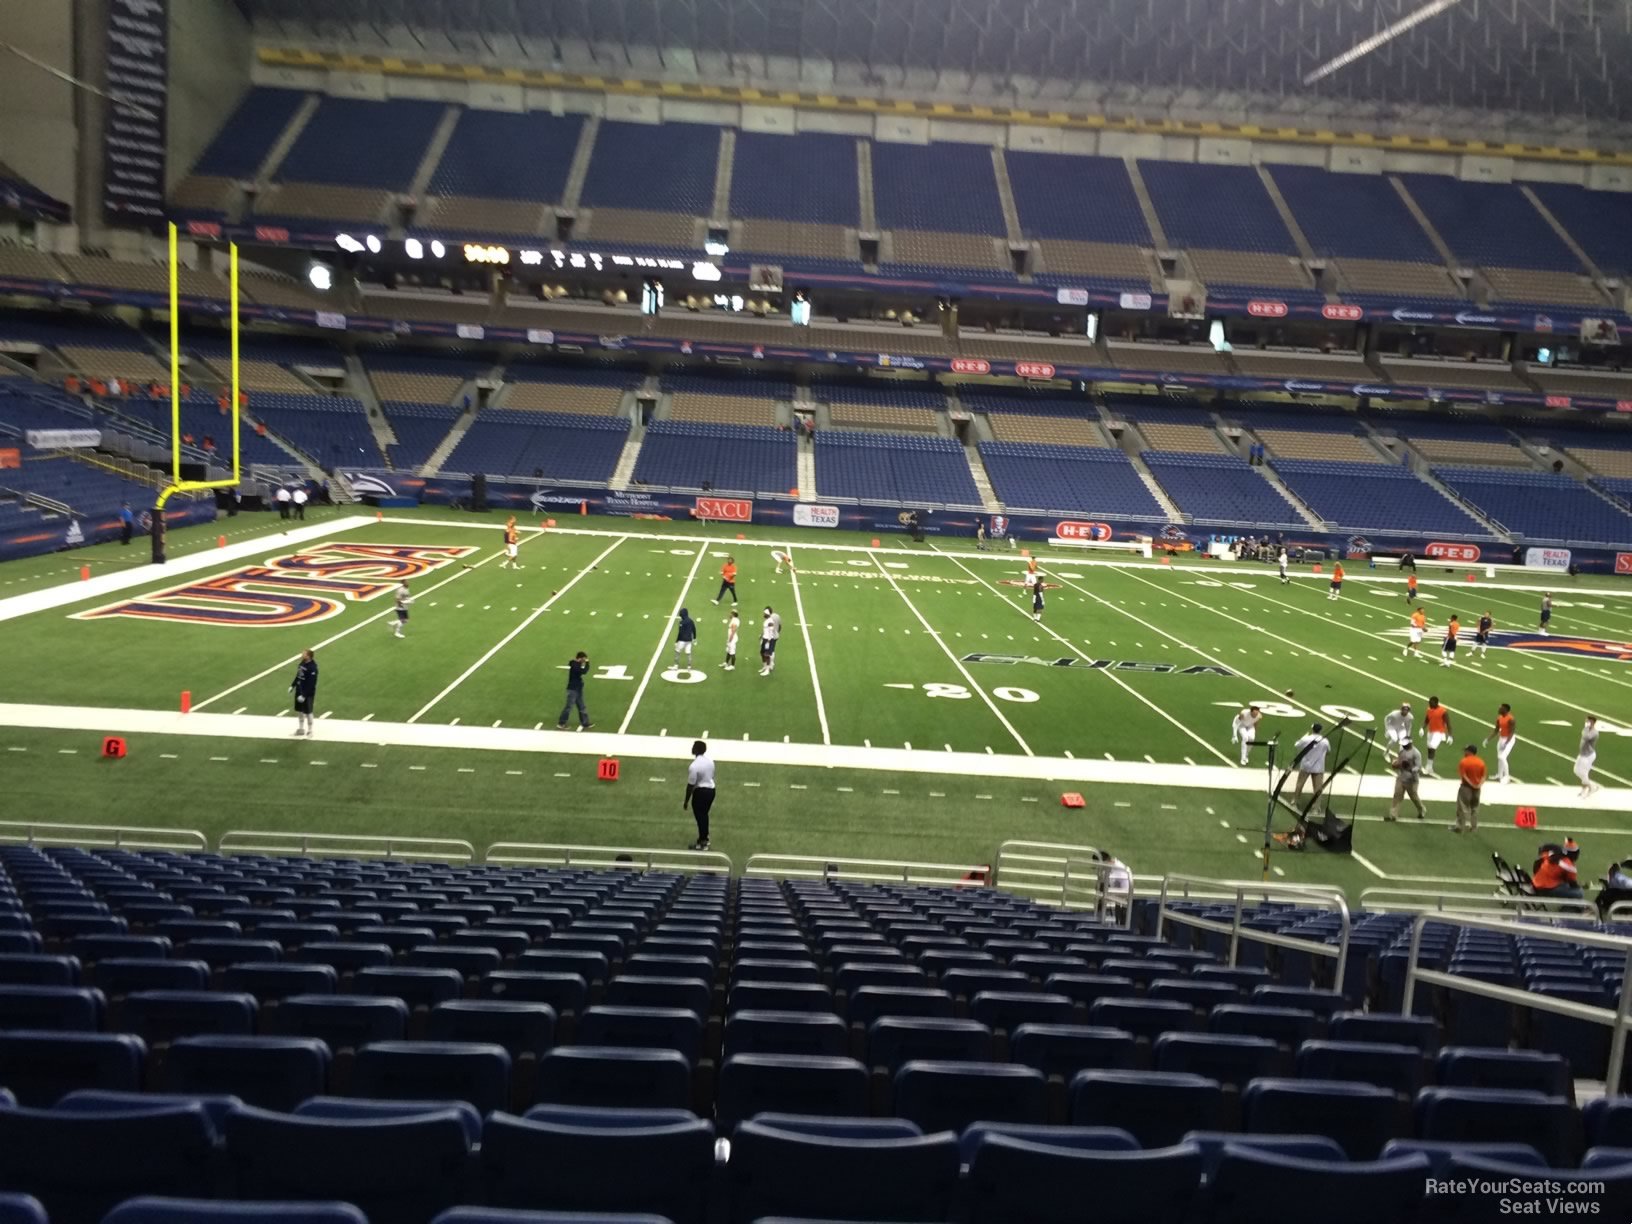 section 115, row 18 seat view  for football - alamodome